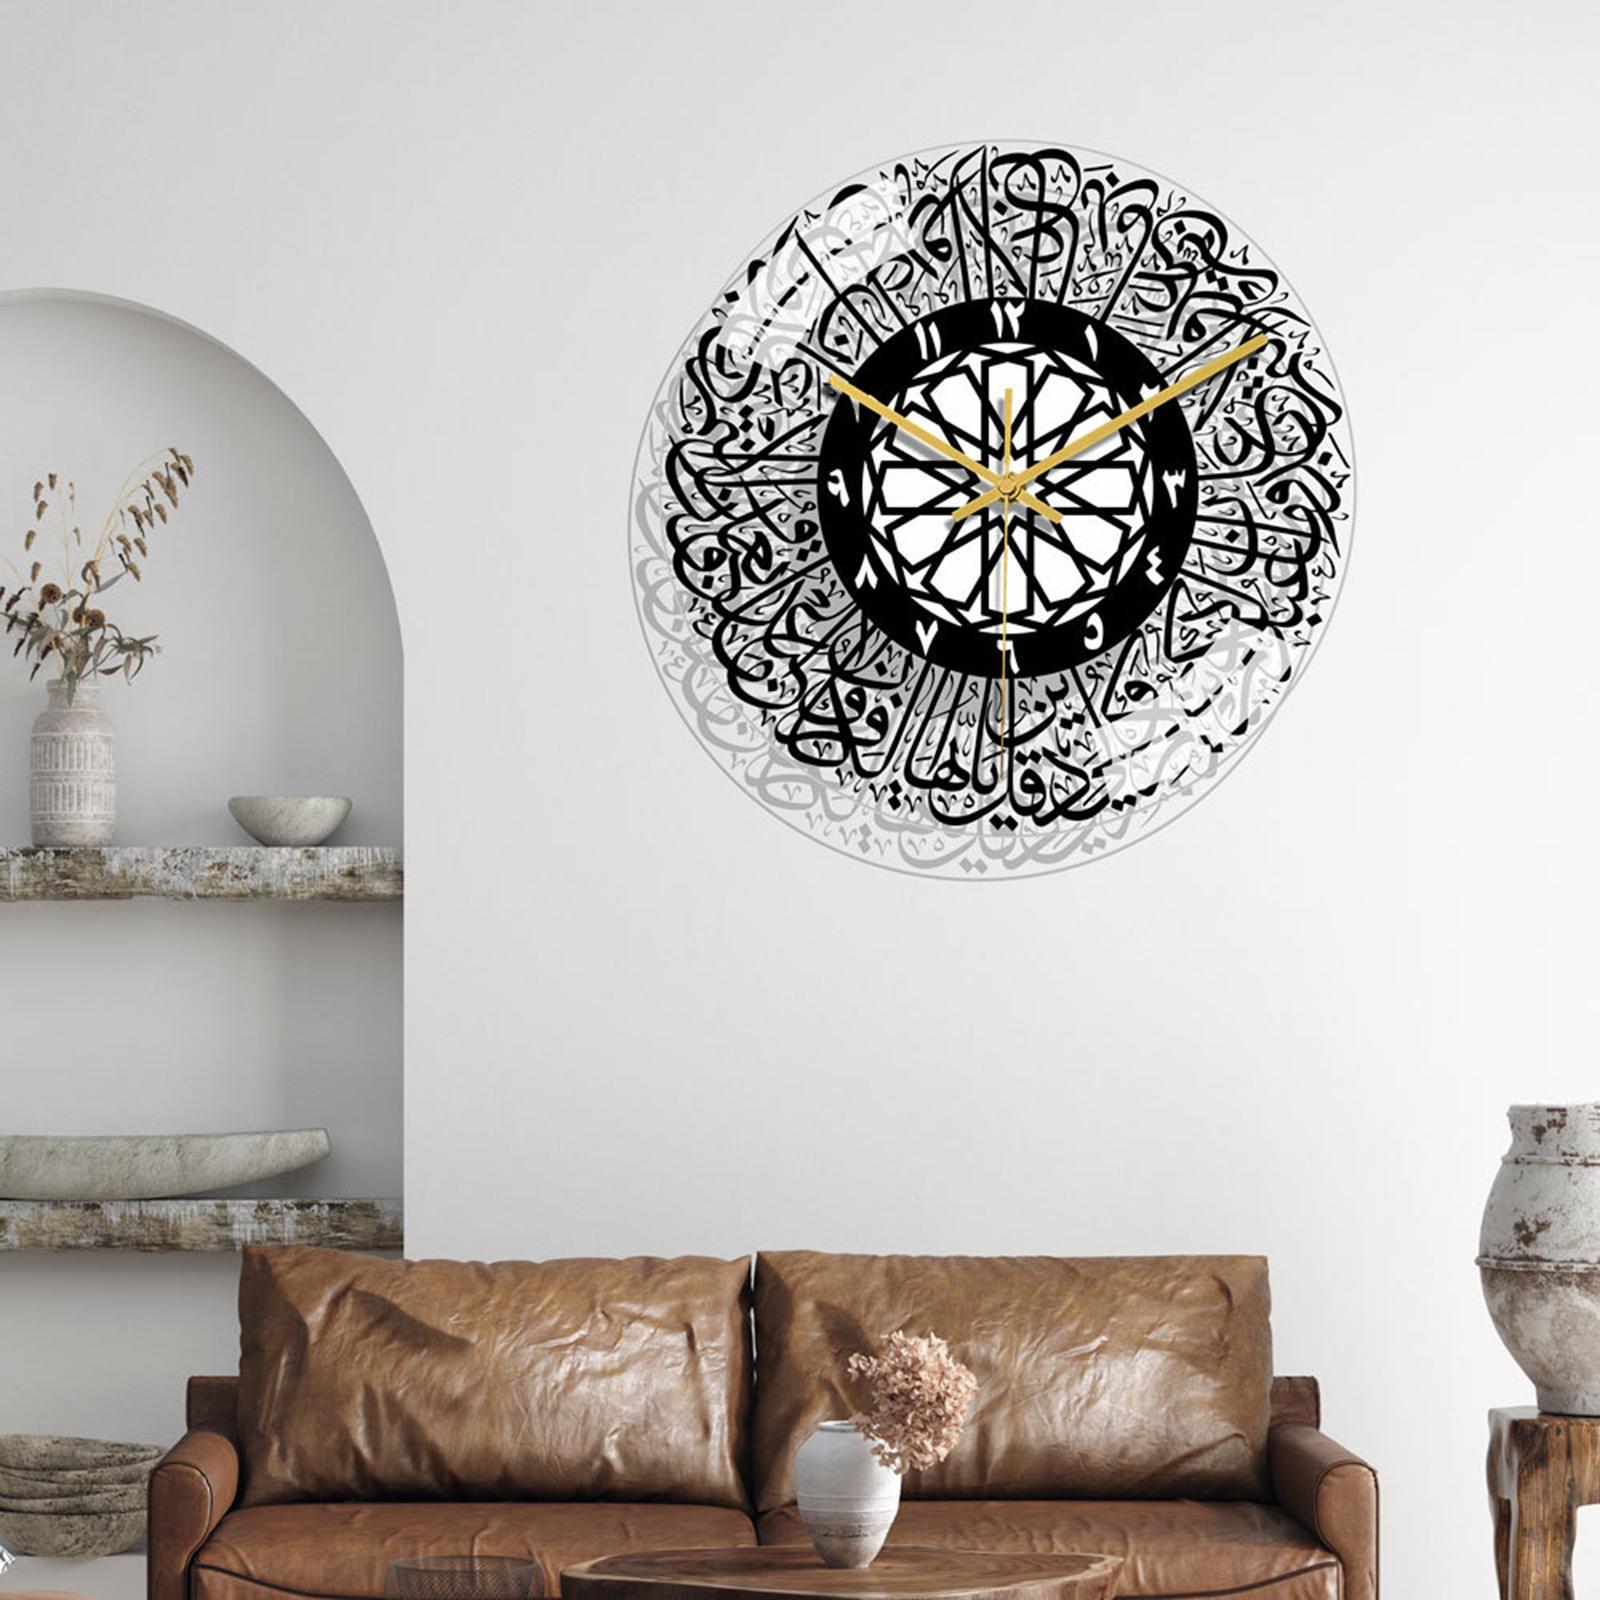 Acrylic Wall Clock Silent Clock for Living Room Home